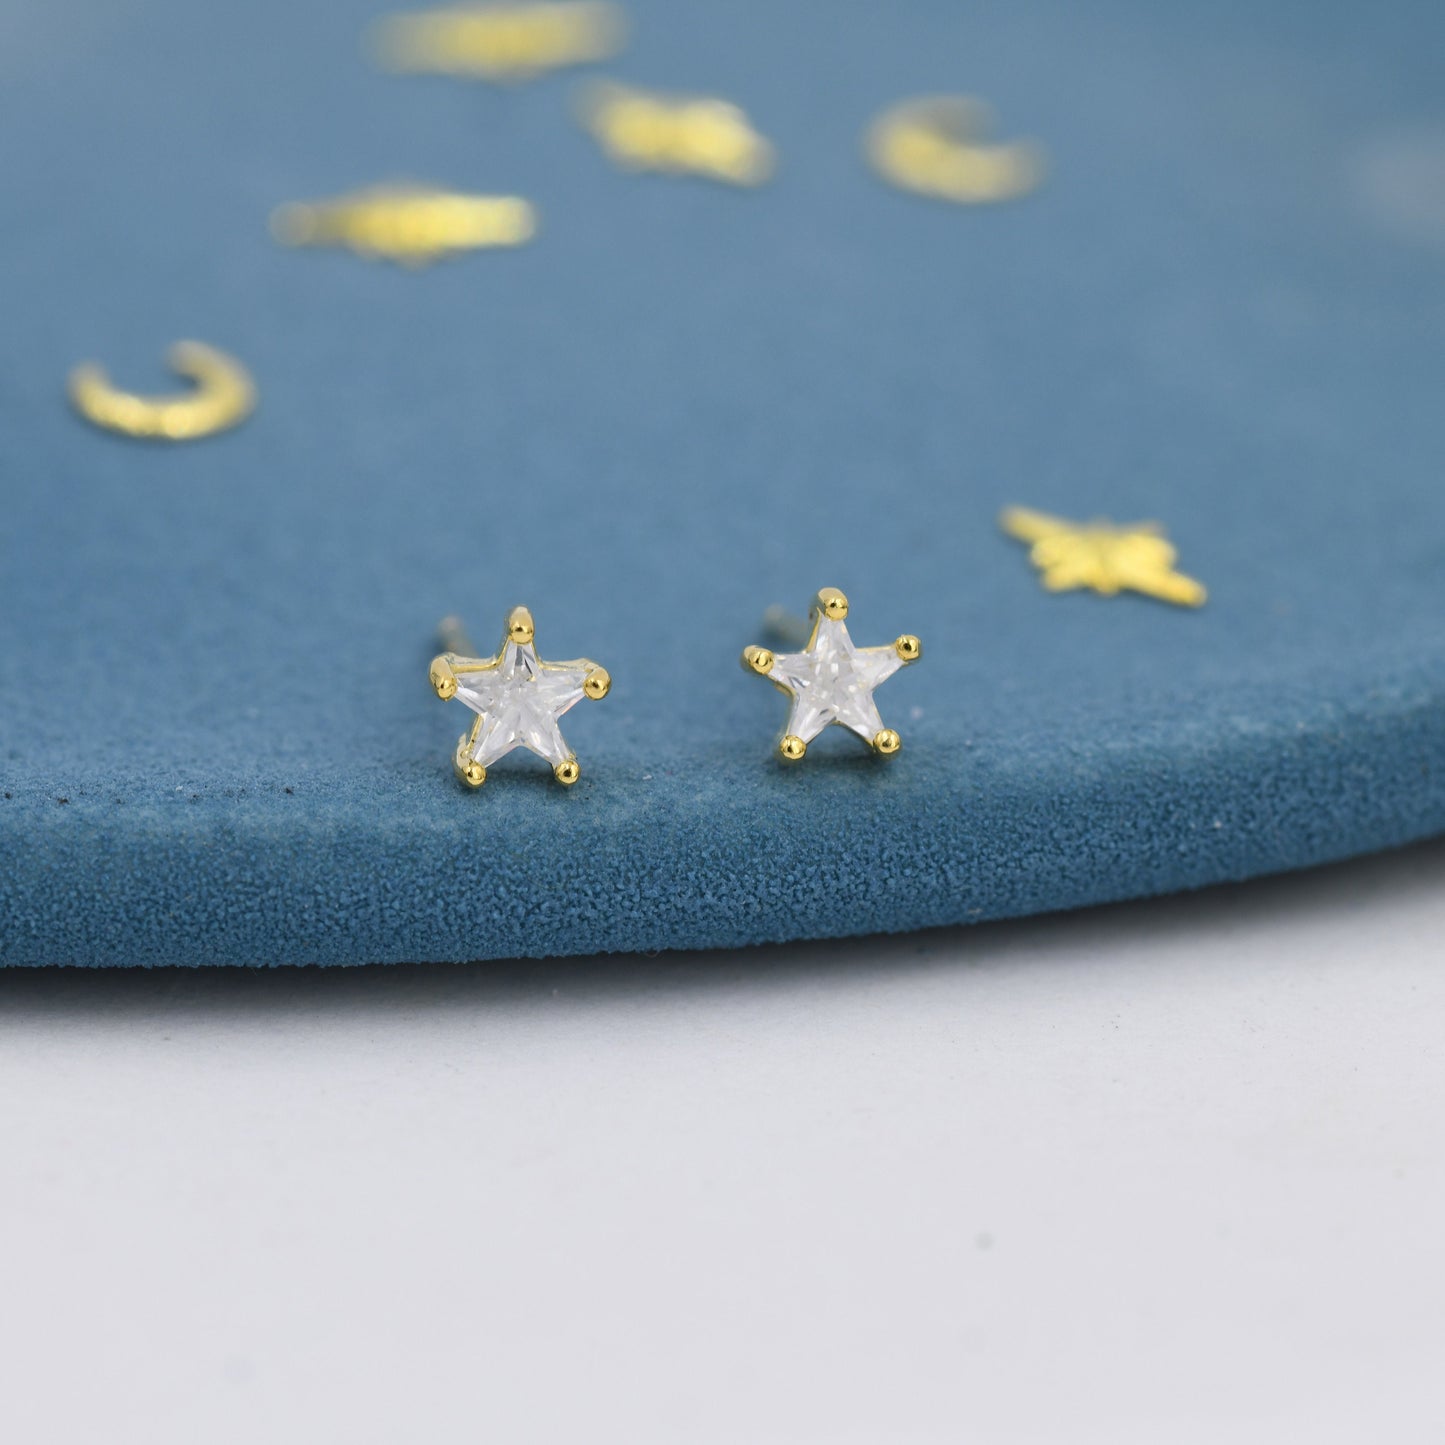 CZ Star Stud Earrings in Sterling Silver, Silver or Gold, Tiny Star Earrings, Solid Silver Small Crystal Star Earrings